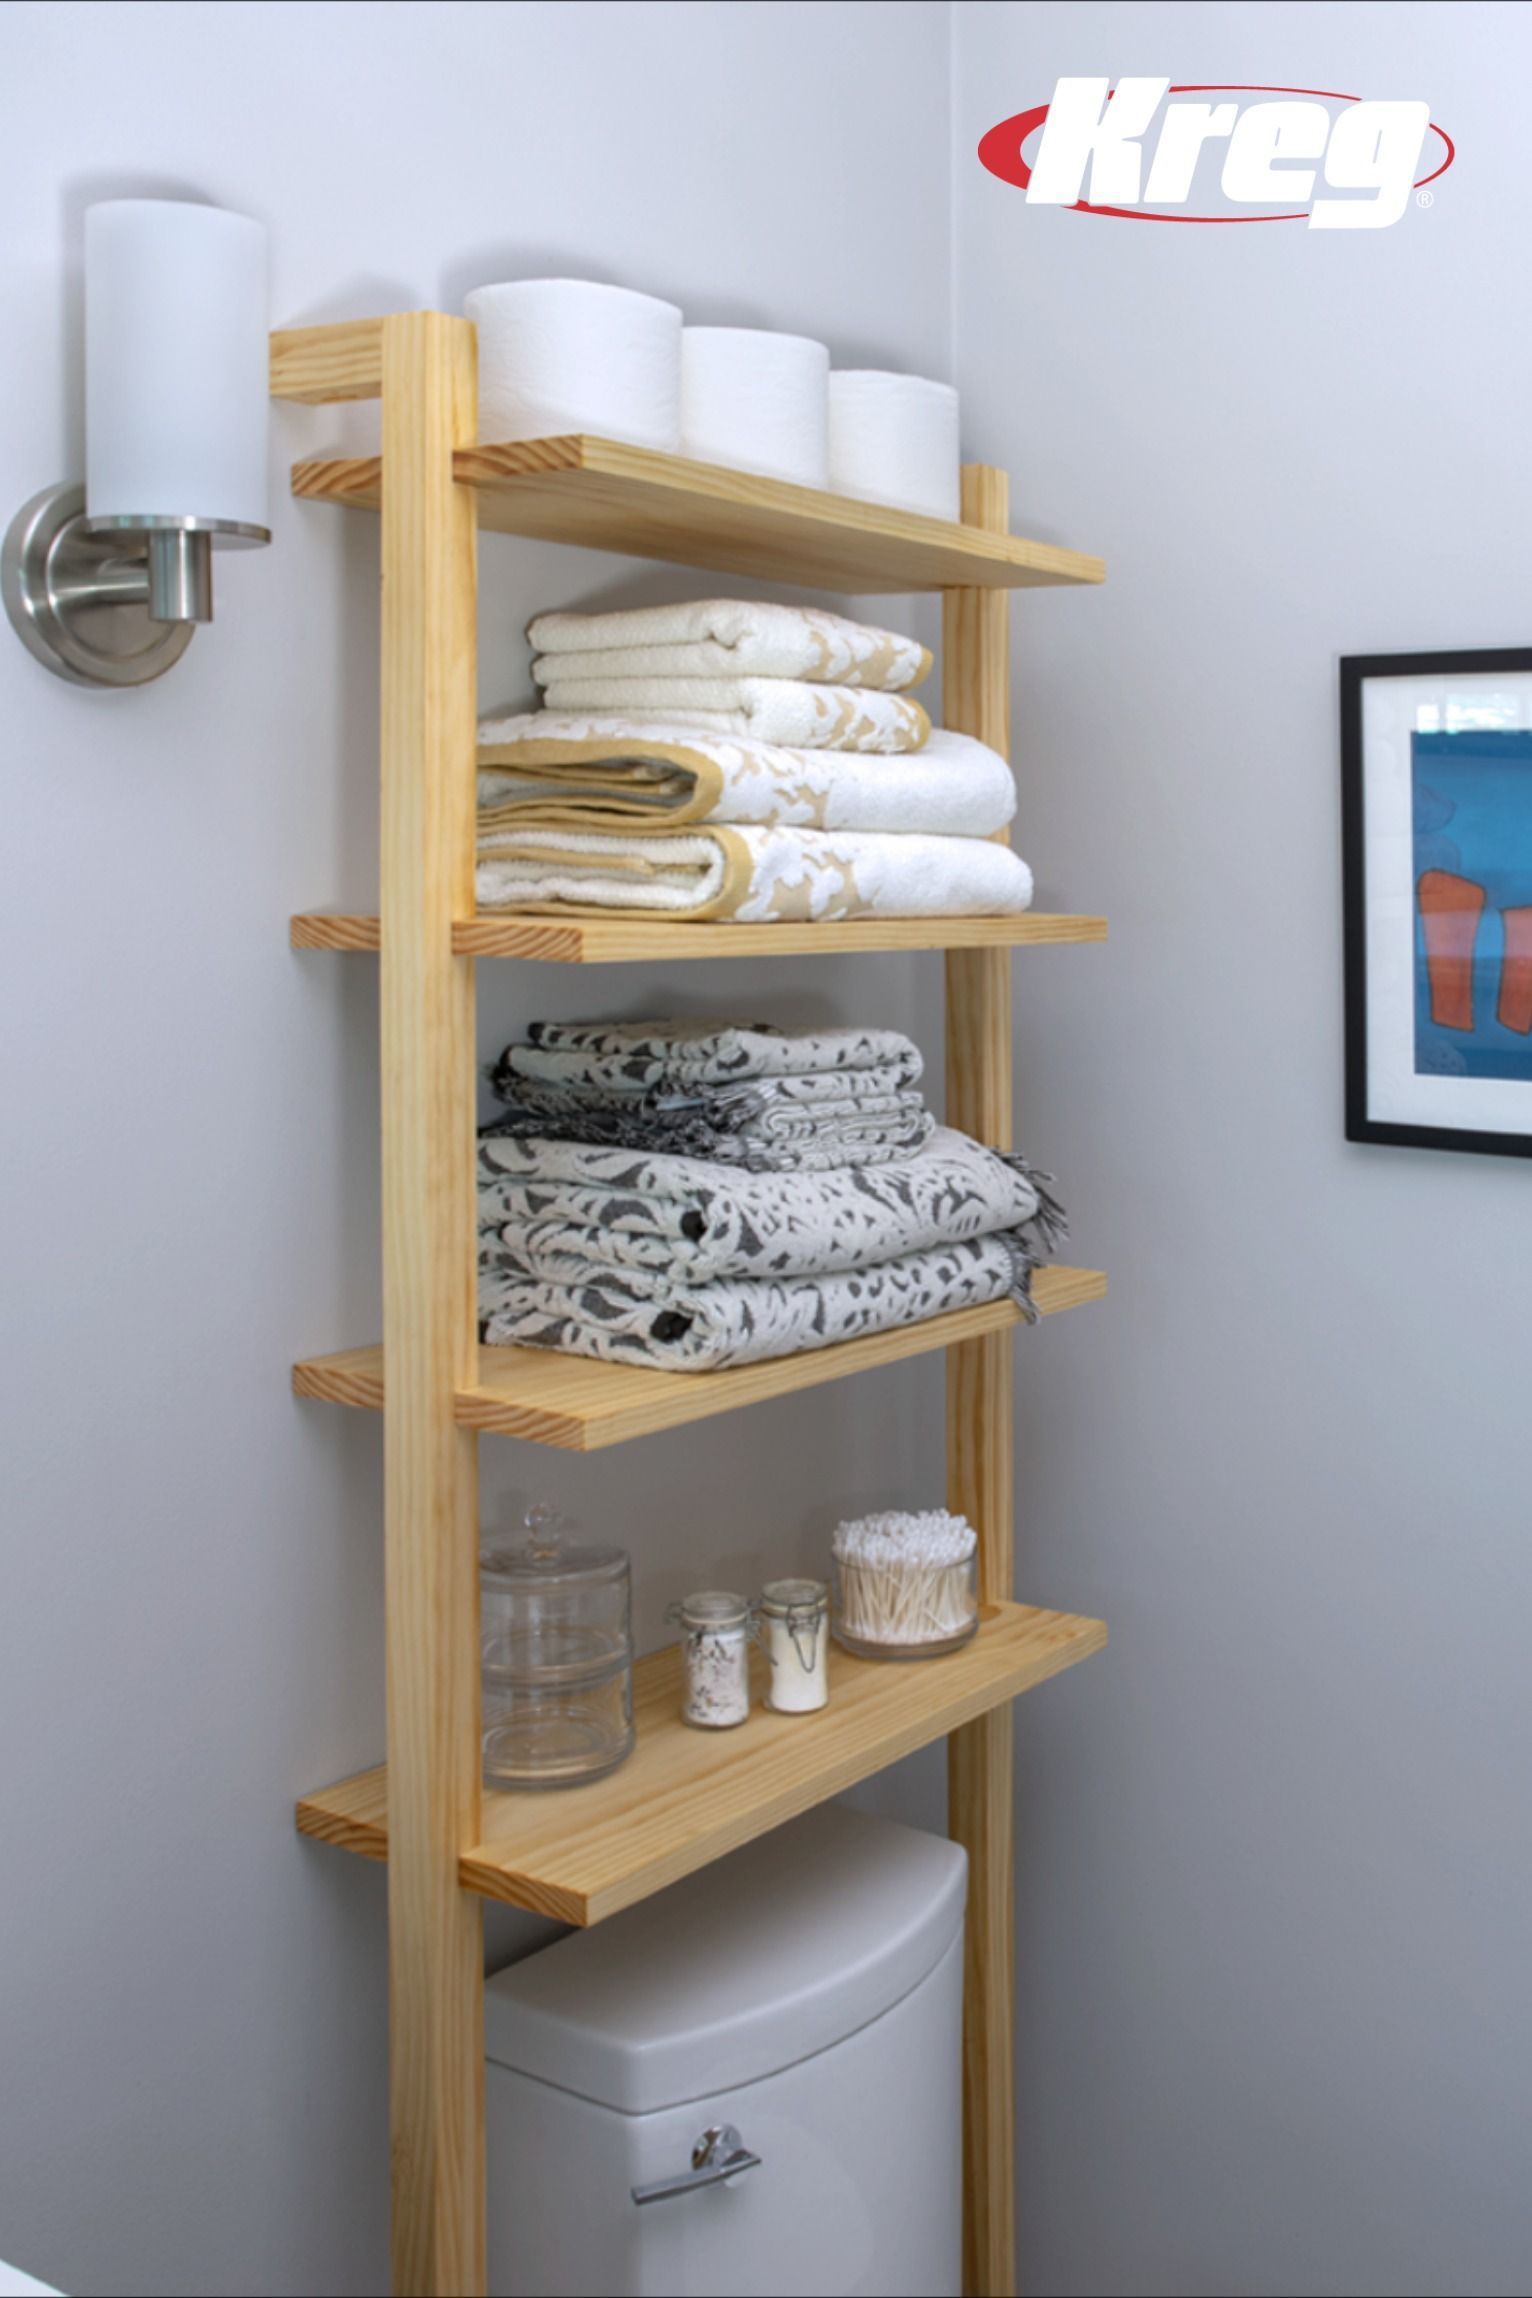 FREE PROJECT PLAN: How to Build DIY Bathroom Storage Shelves - FREE PROJECT PLAN: How to Build DIY Bathroom Storage Shelves -   17 diy Muebles cuarto ideas